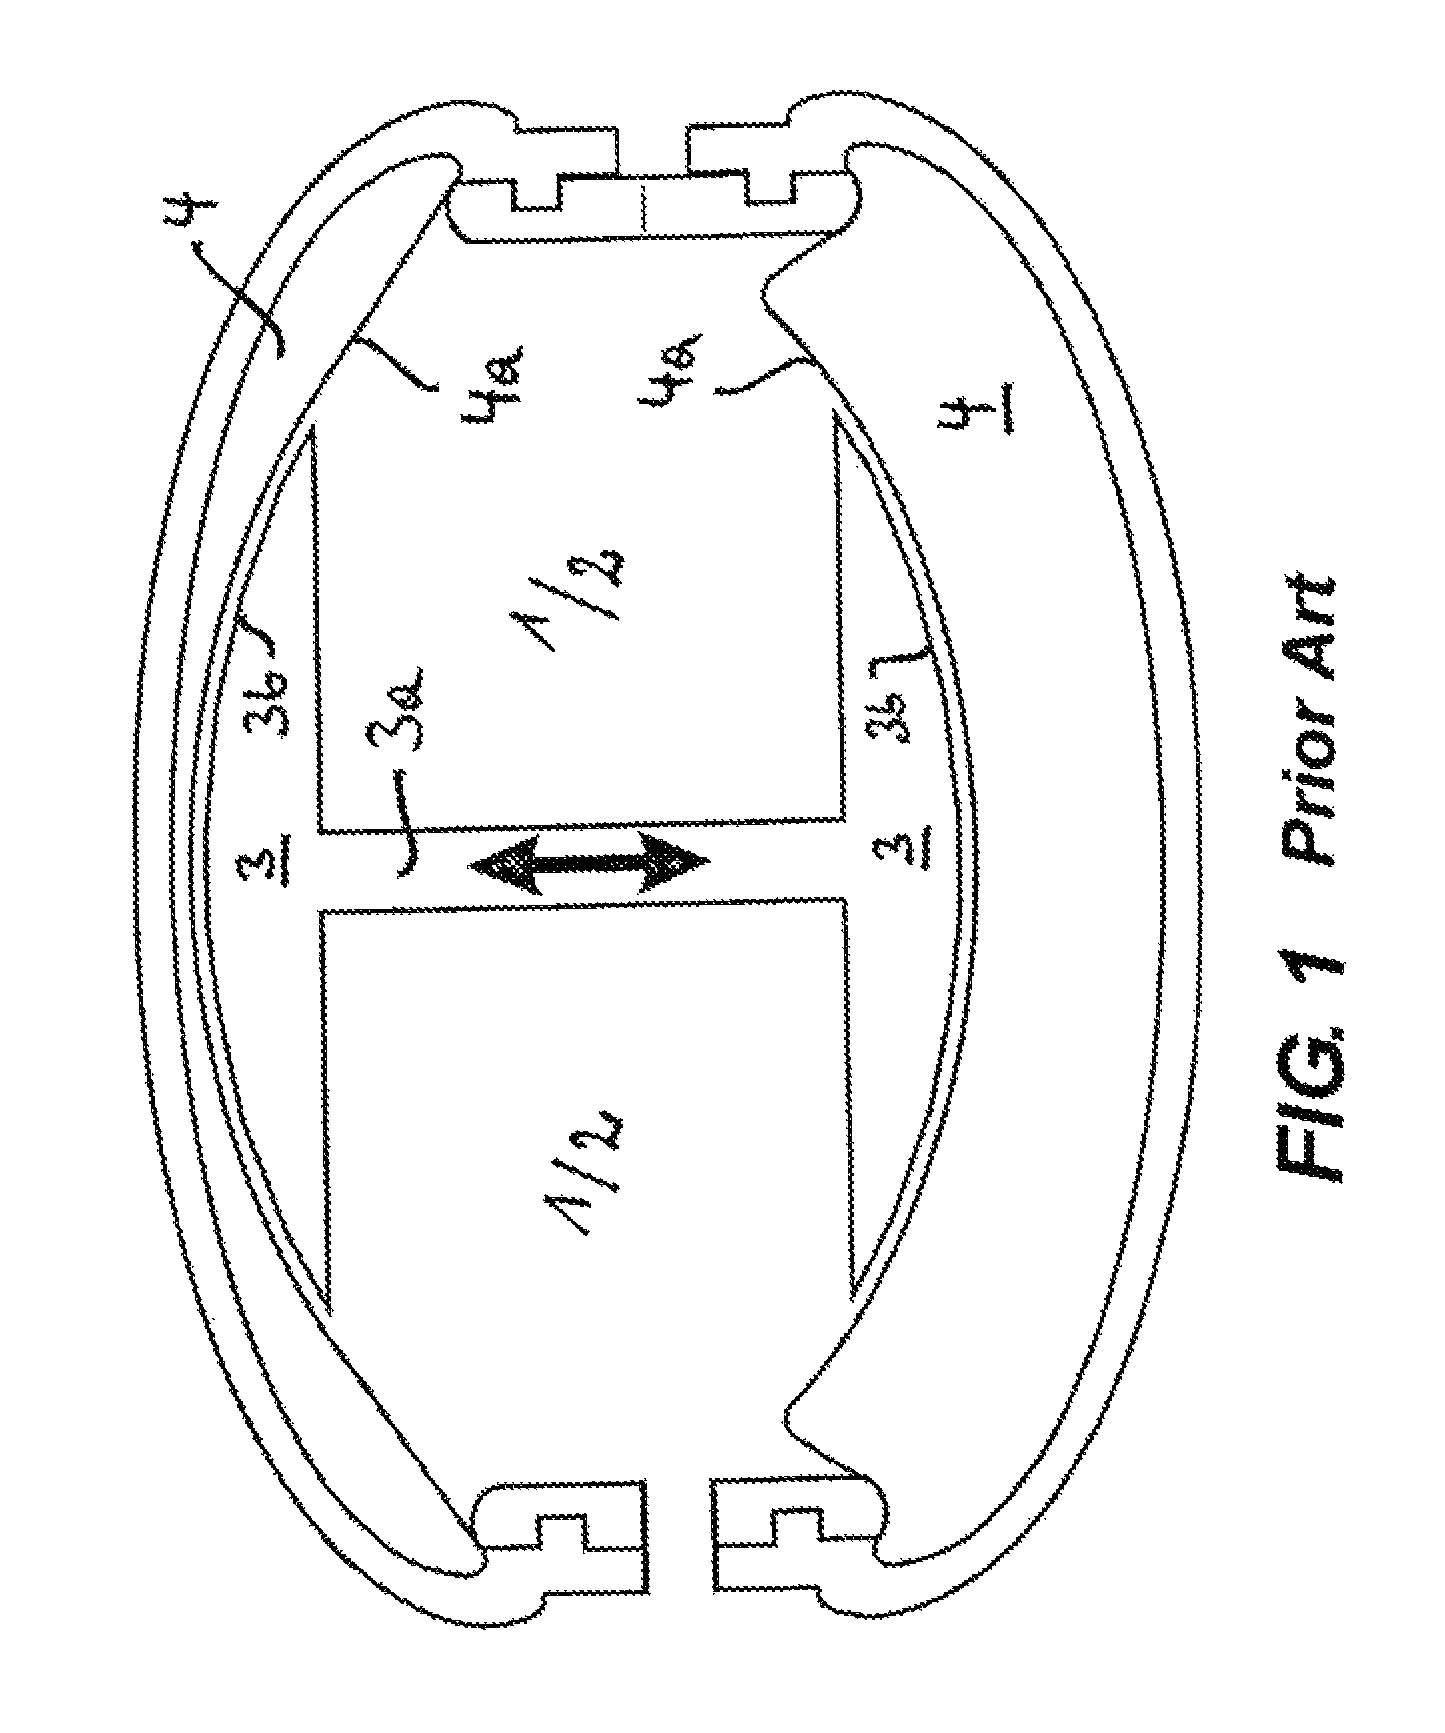 Linear drive and pump system, in particular an artificial heart